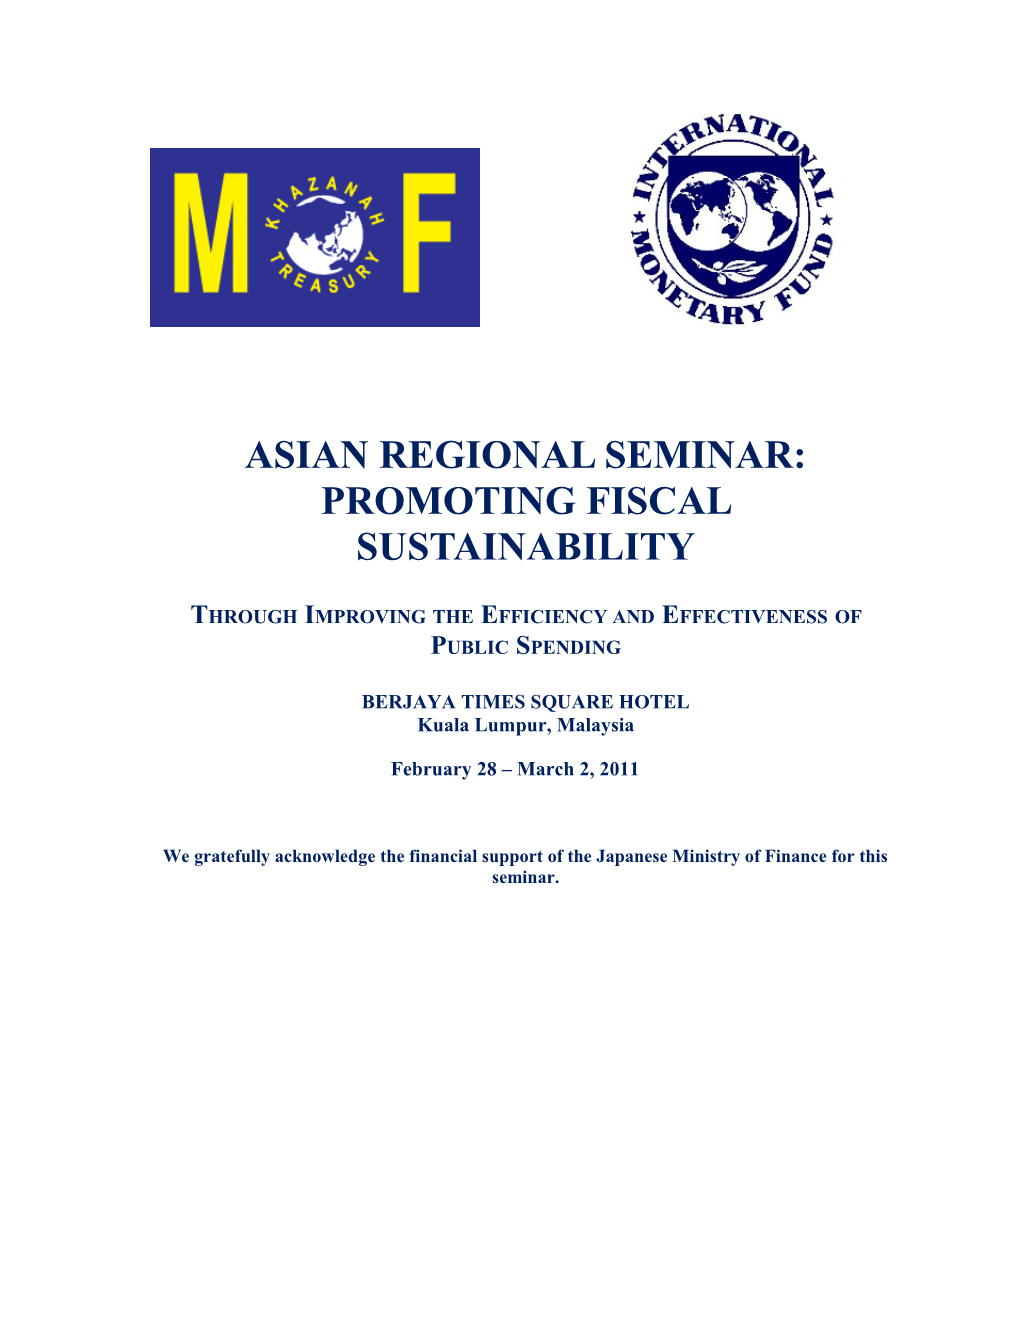 Asian Regional Seminar: Promoting Fiscal Sustainability